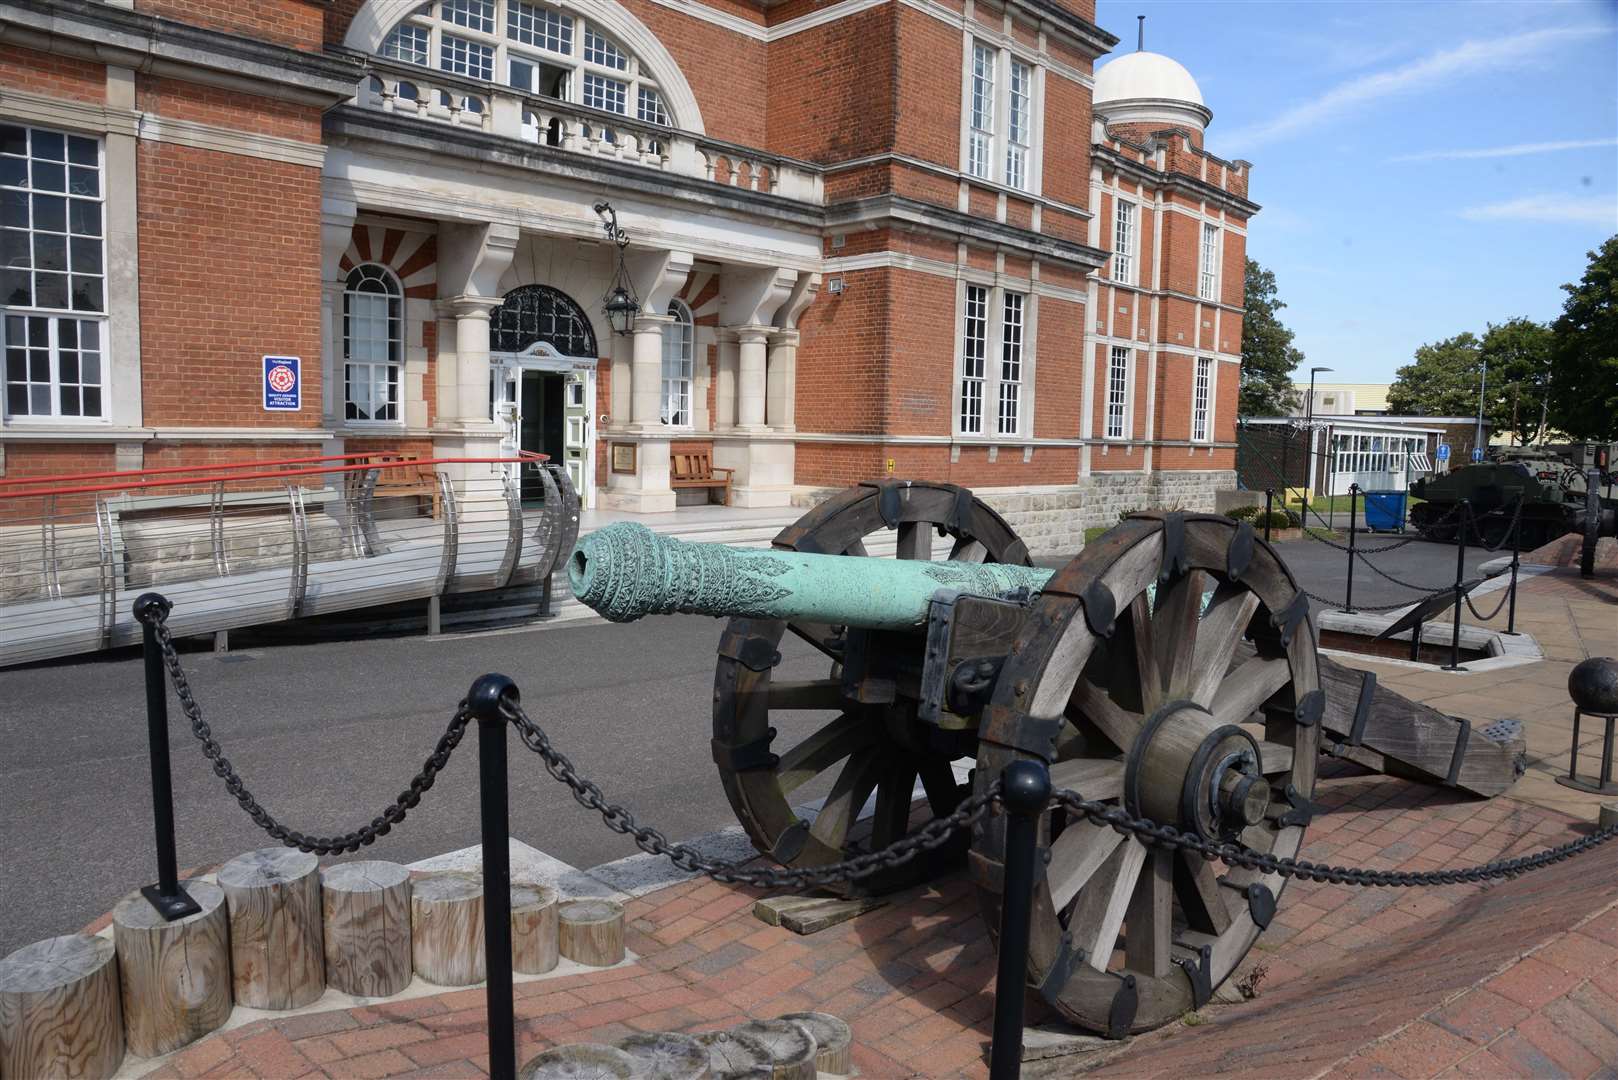 The Royal Engineers Museum in Gillingham is set to reopen on Saturday, August 15